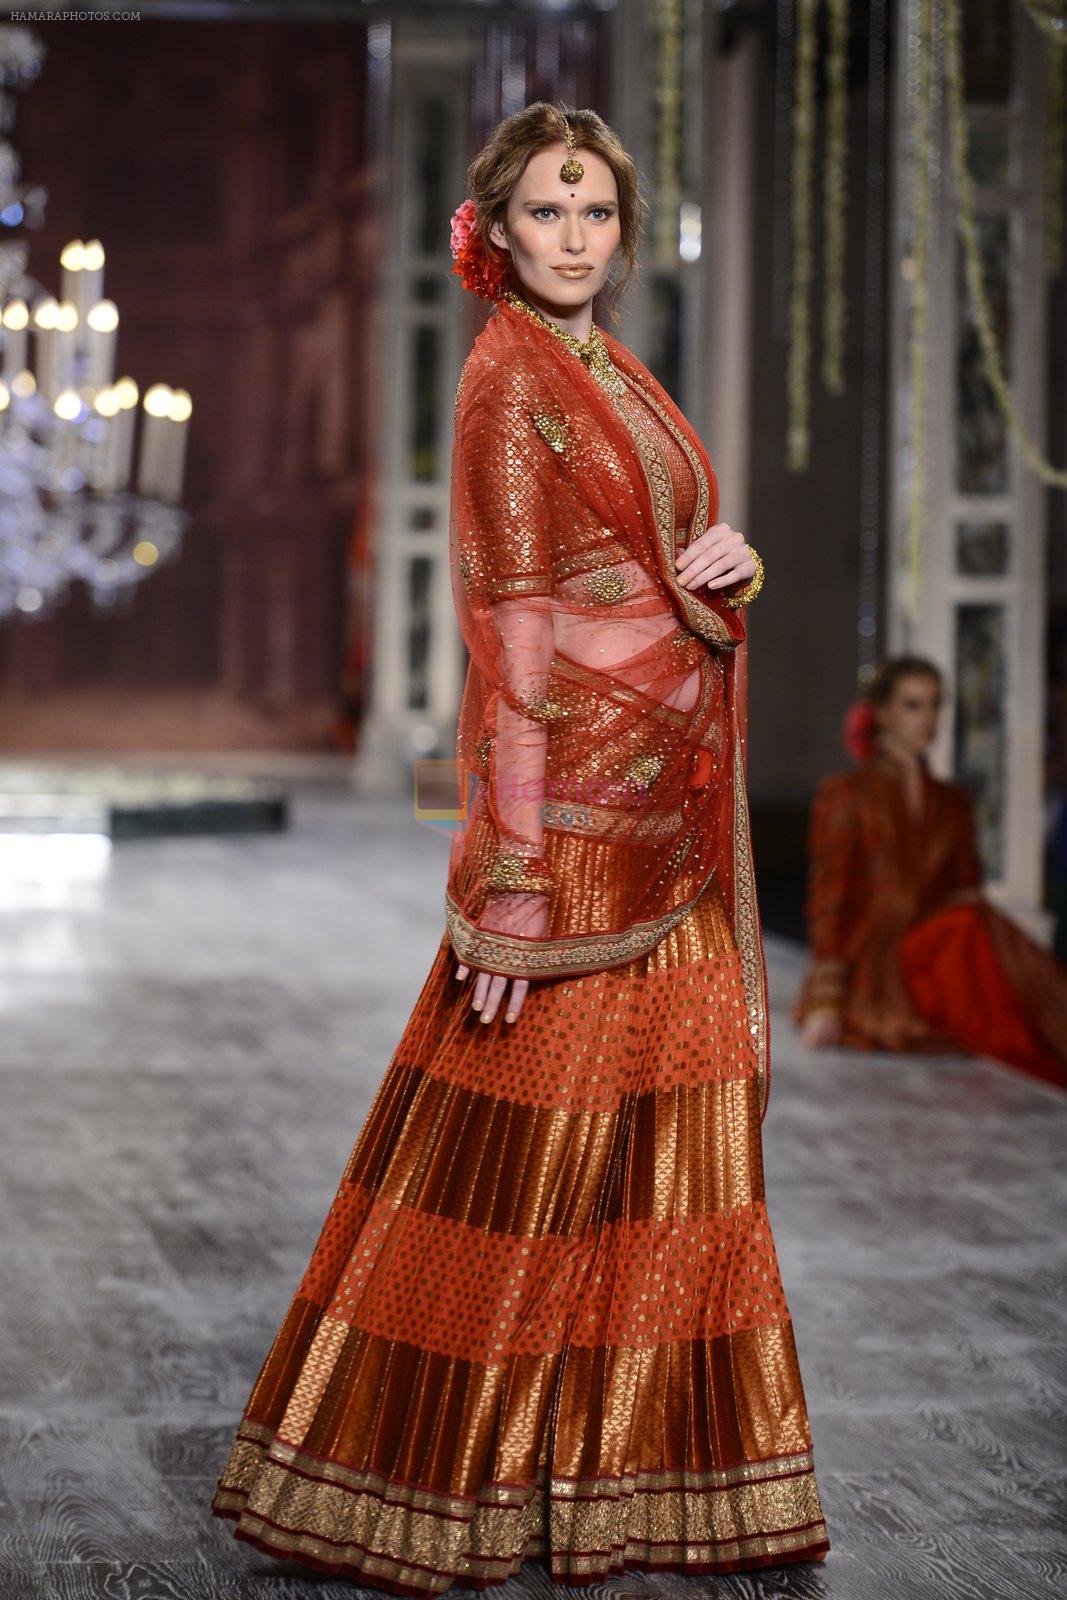 Model walk the ramp for Tarun Tahiliani show at the FDCI India Couture Week 2016 on 21st July 2016 shown to user